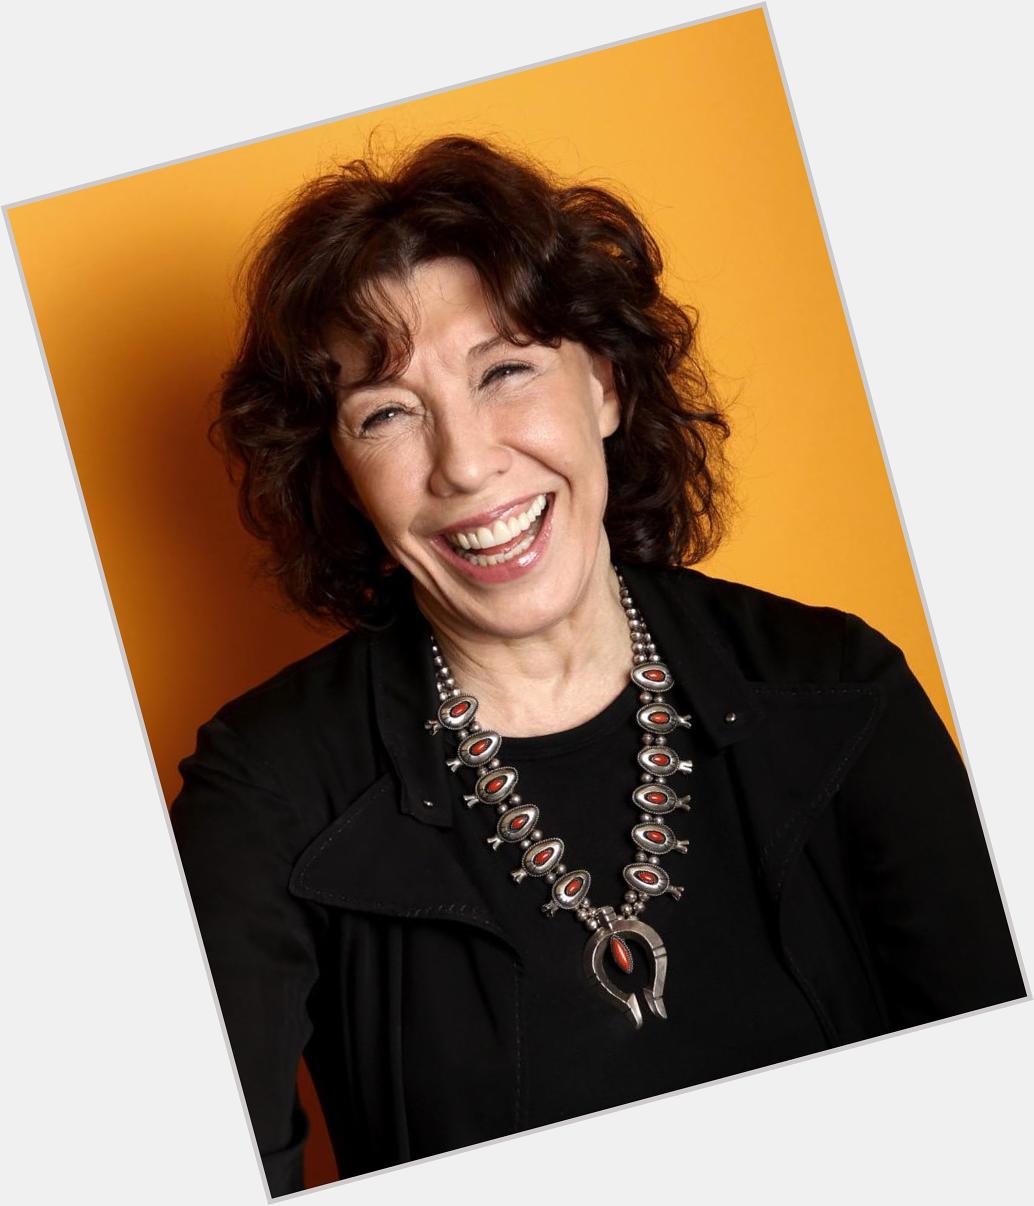 HAPPY BDAY LILY TOMLIN! HOW IS THE FLEA MARKET GOING?? HOW IS THE JEWELRY SELLING? U MARKED ME TARDY THO LILY  